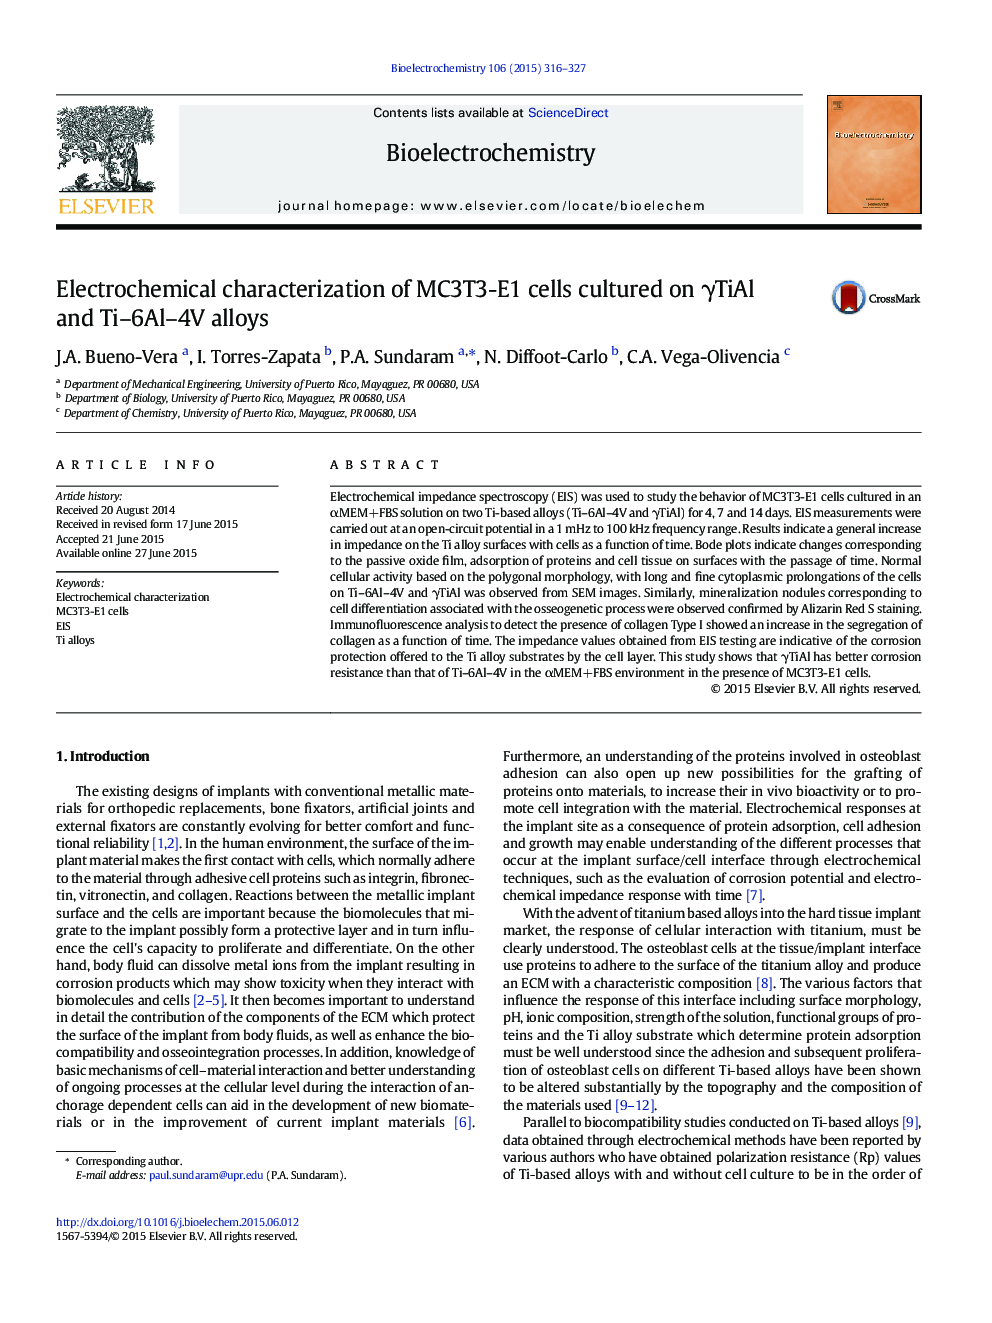 Electrochemical characterization of MC3T3-E1 cells cultured on γTiAl and Ti–6Al–4V alloys